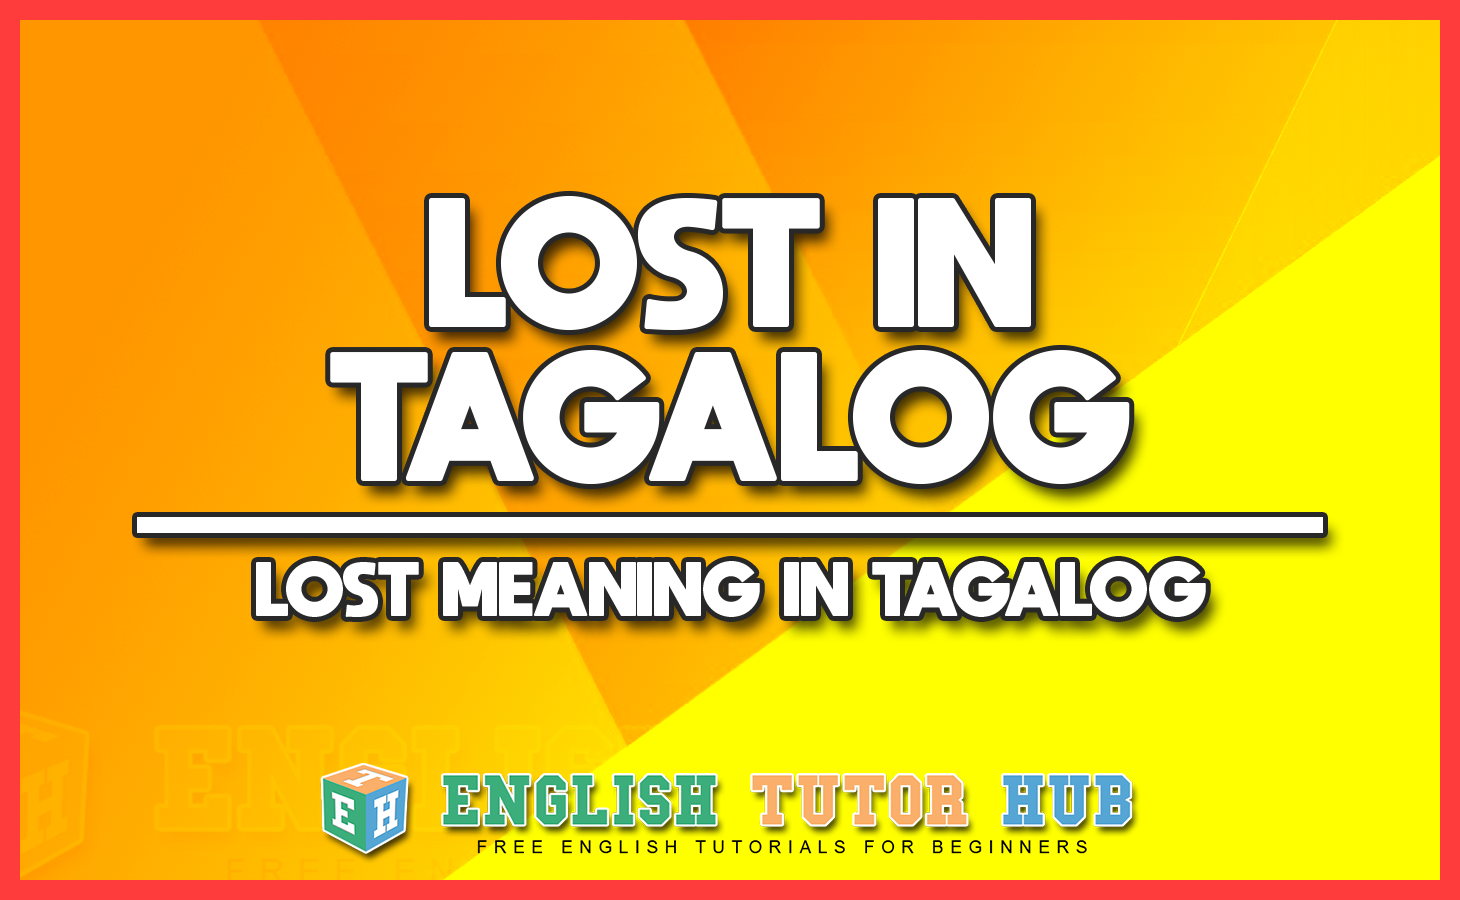 LOST IN TAGALOG - LOST MEANING IN TAGALOG